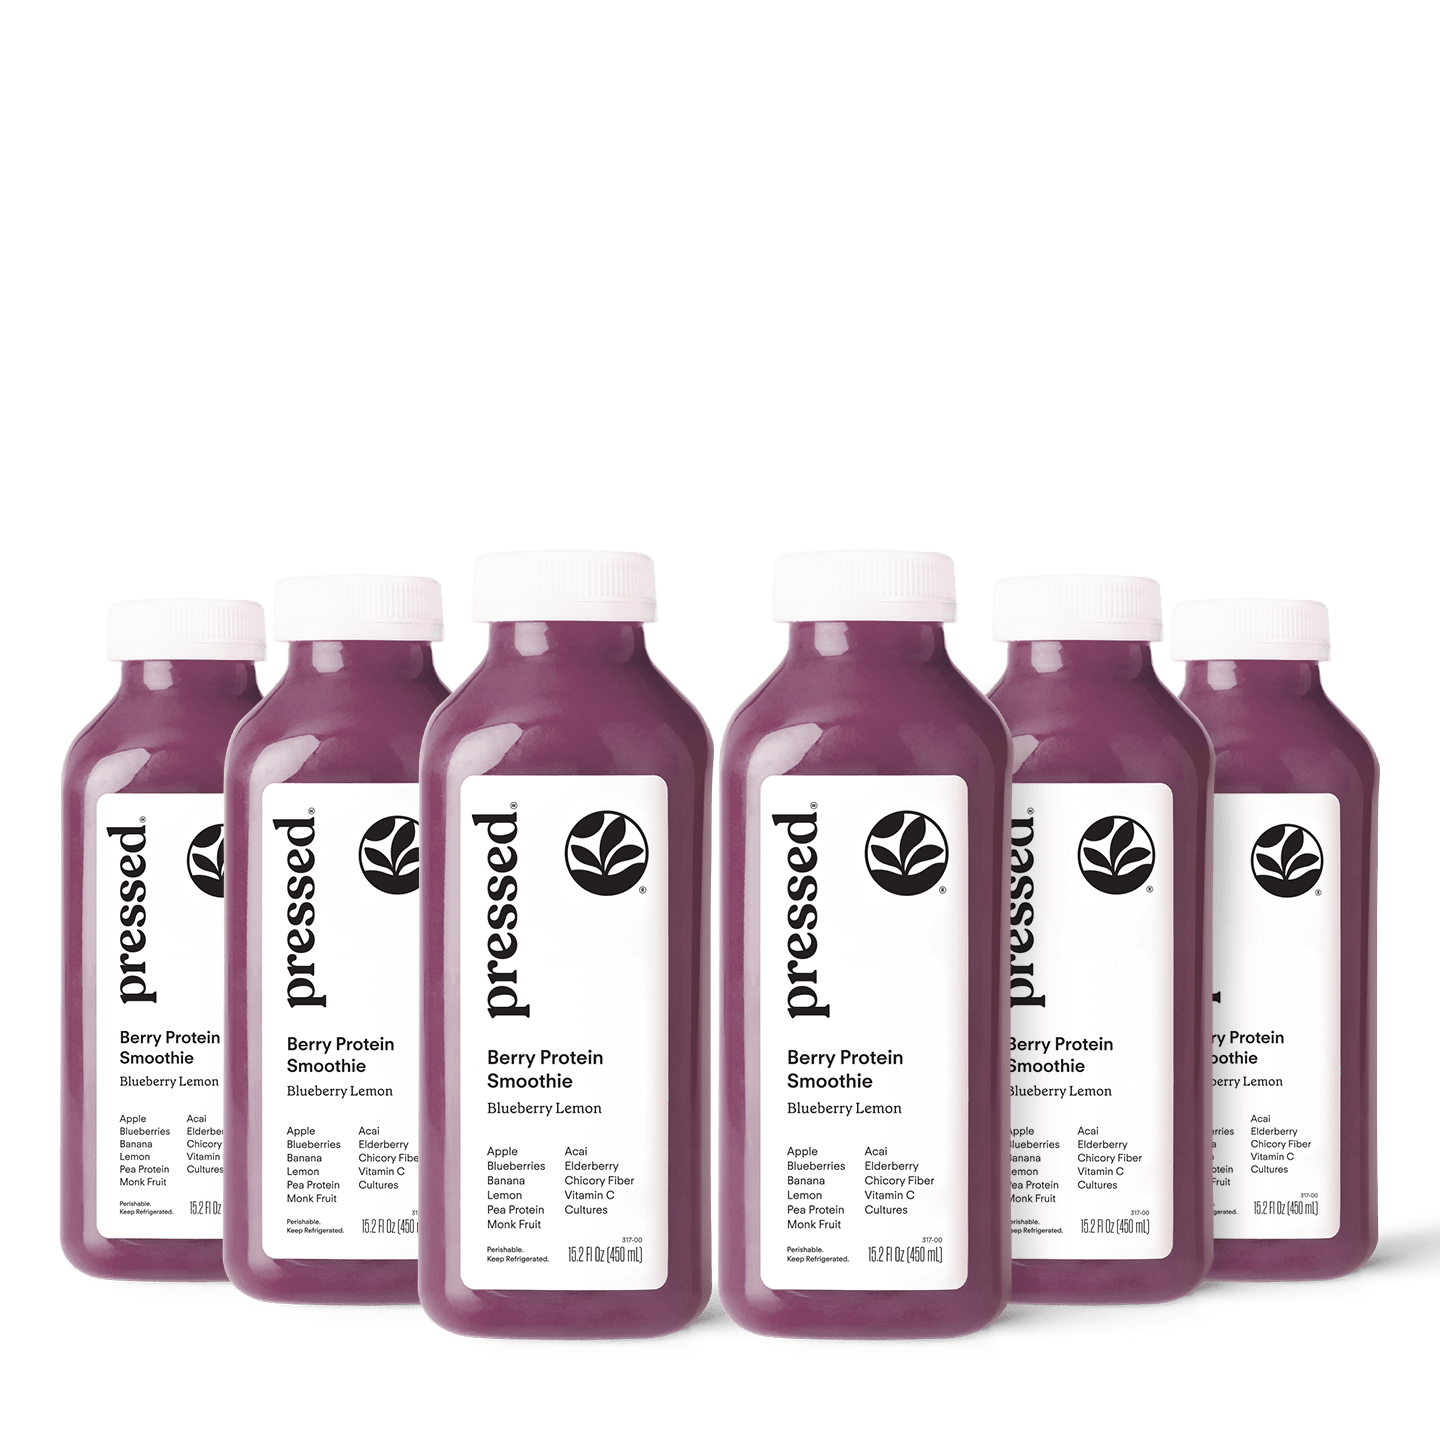 Protein Smoothie - Mixed Berry and Tropical Fruit 24 pack